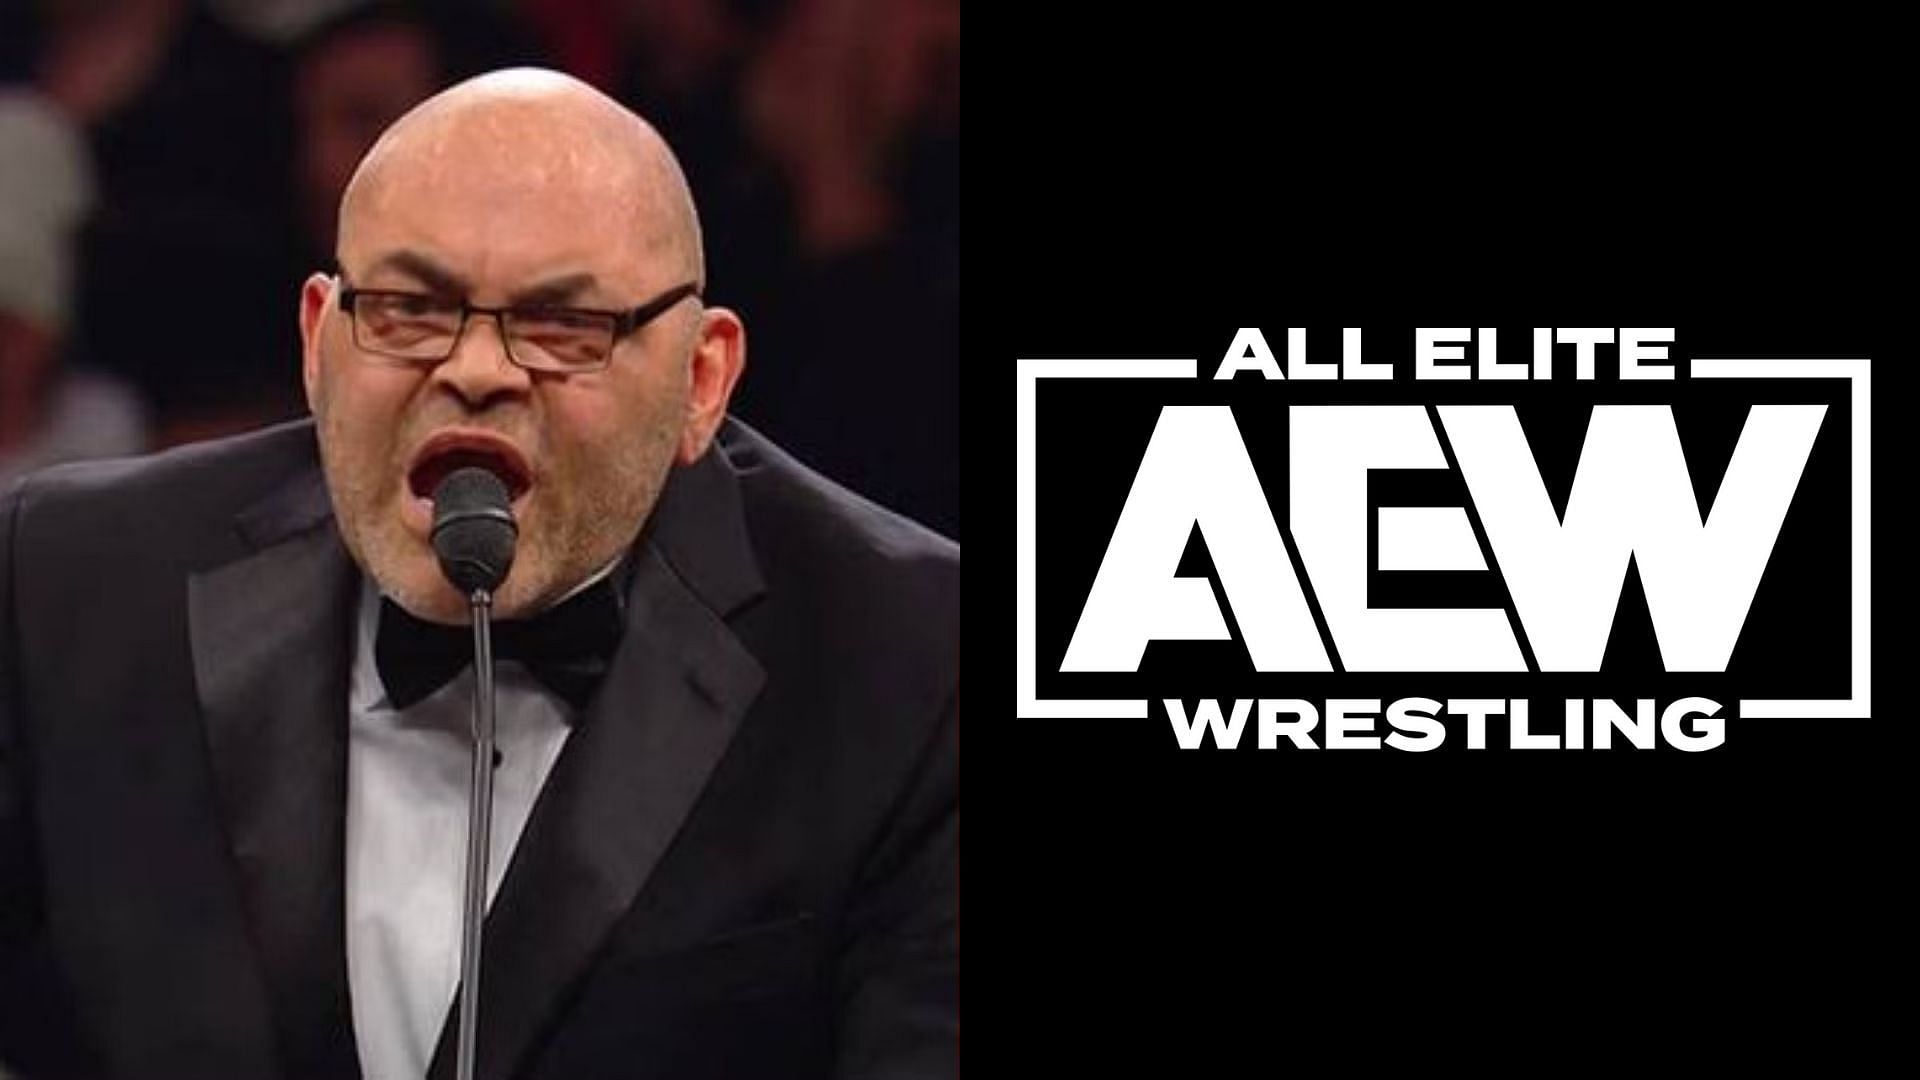 What could these two stars have done to upset Konnan this way?